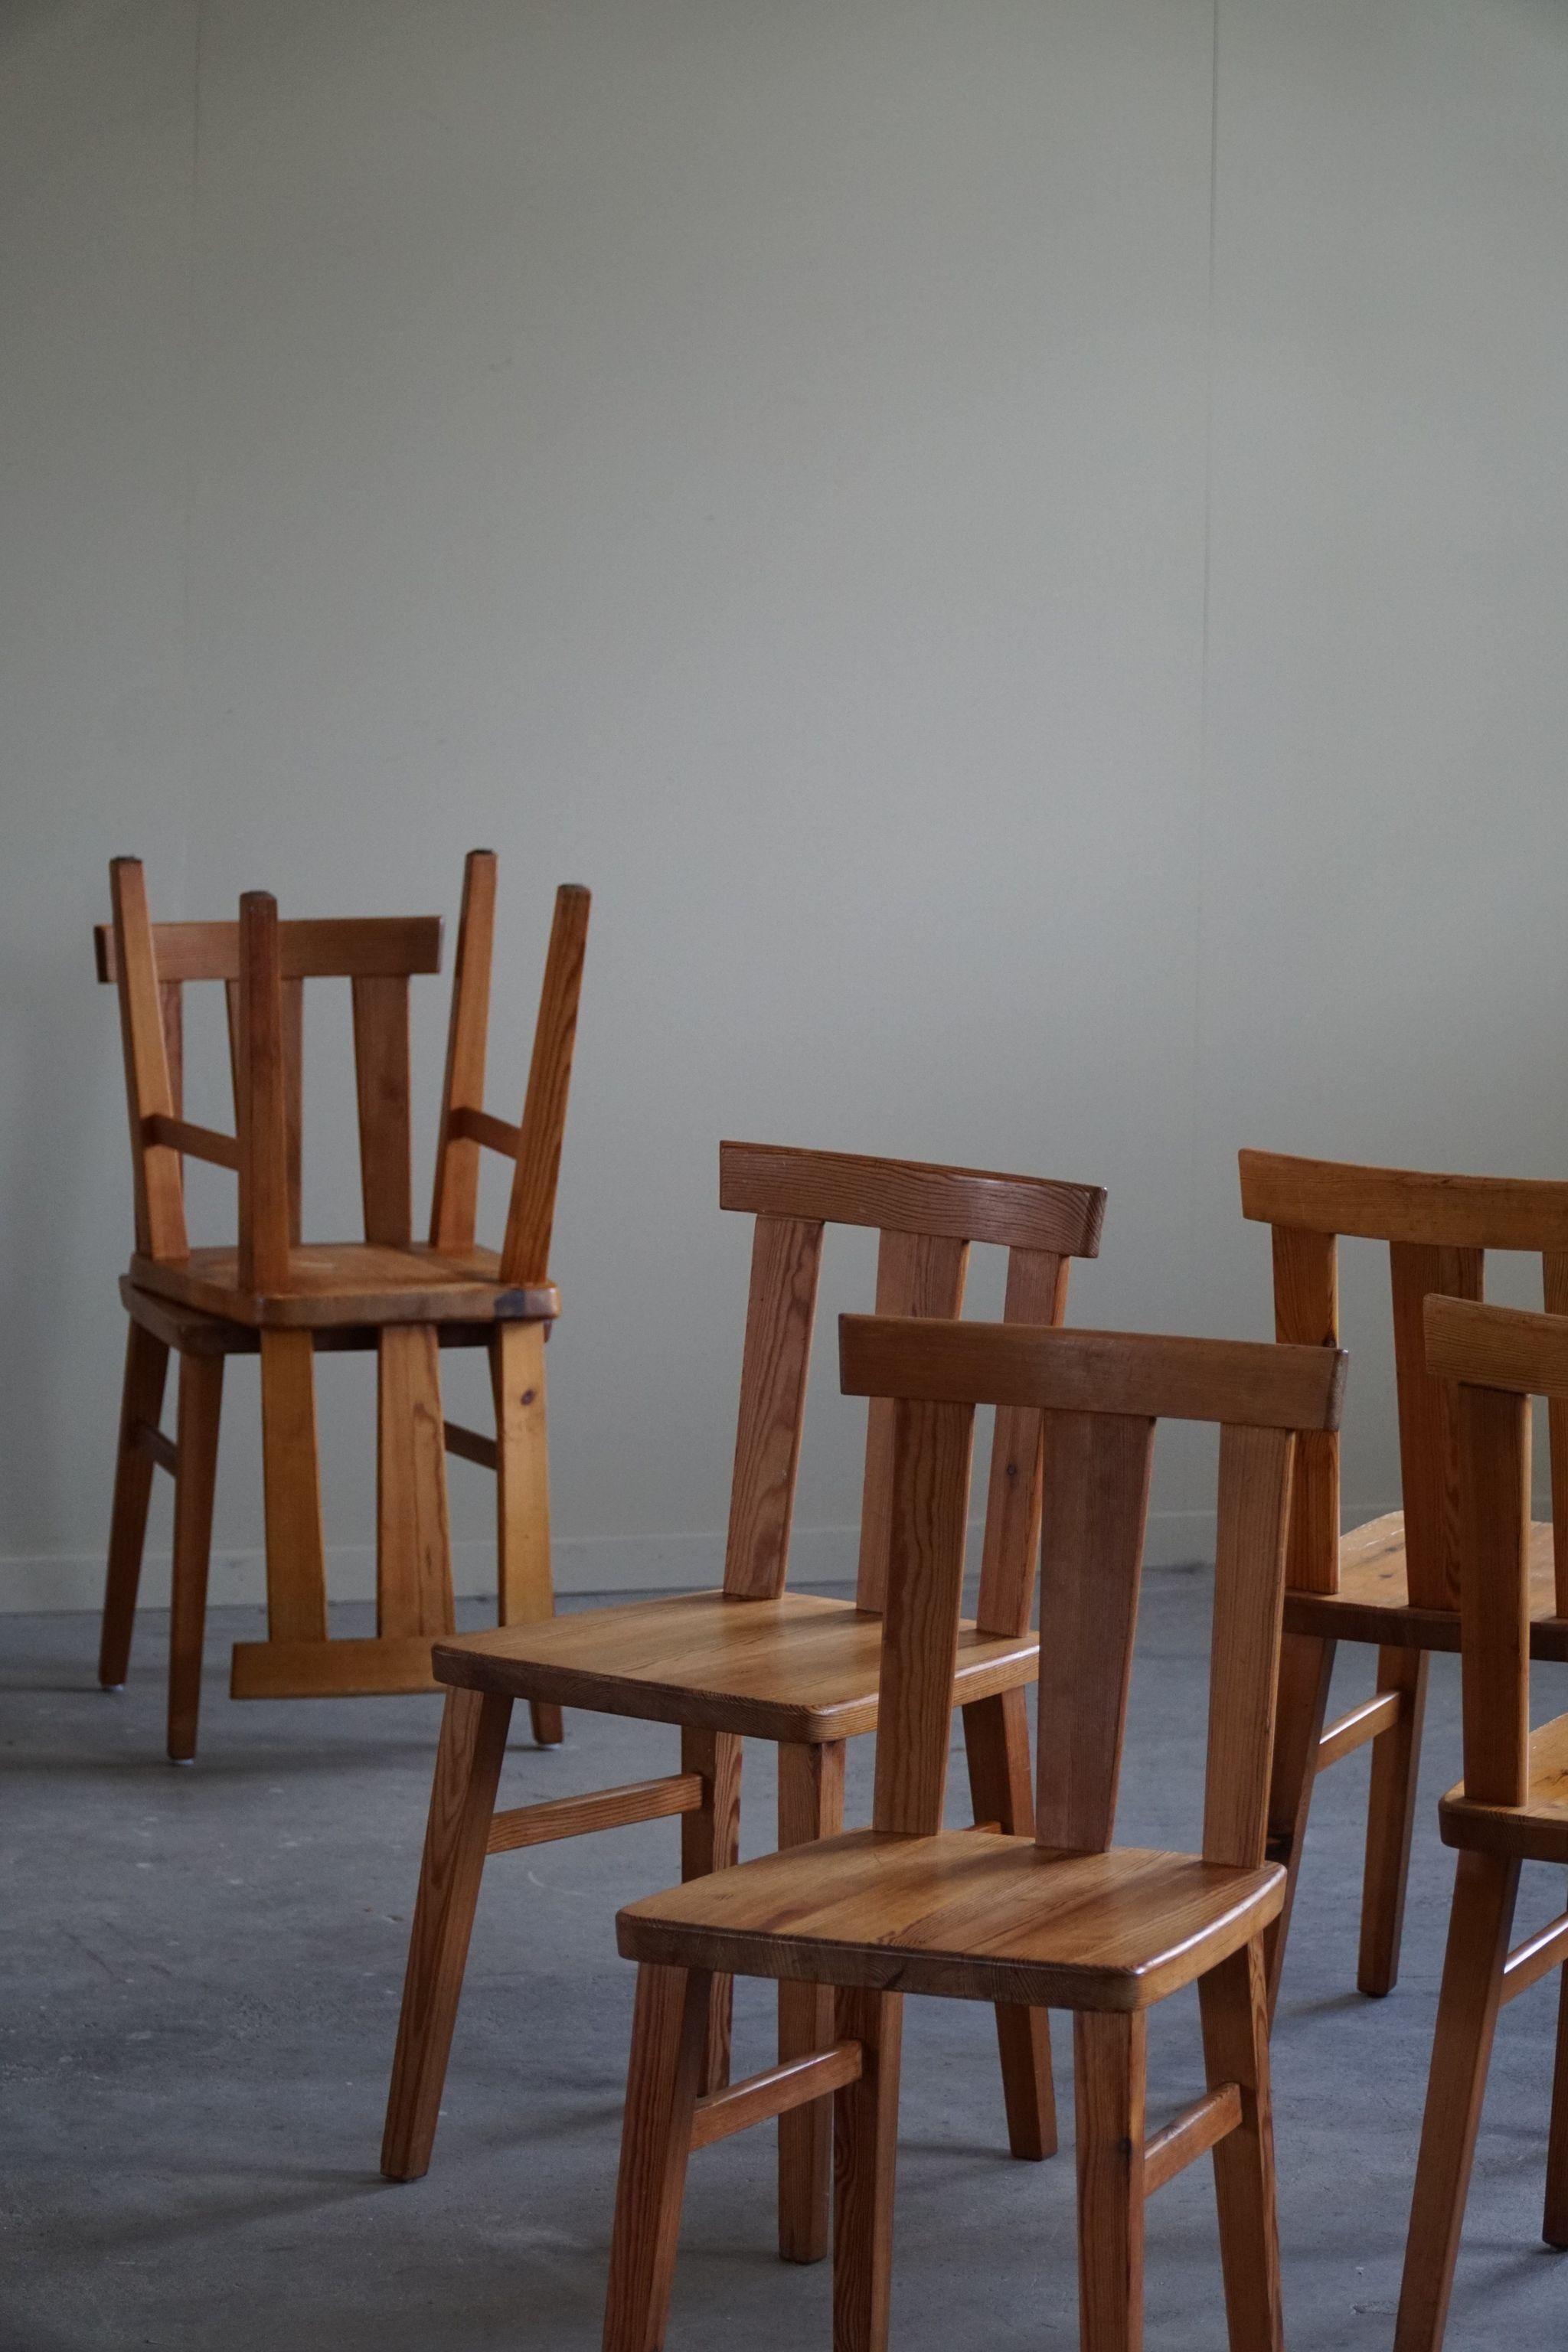 Swedish Modern, Set of 8 Chairs in Solid Pine, Axel Einar Hjorth Style, 1950s For Sale 10